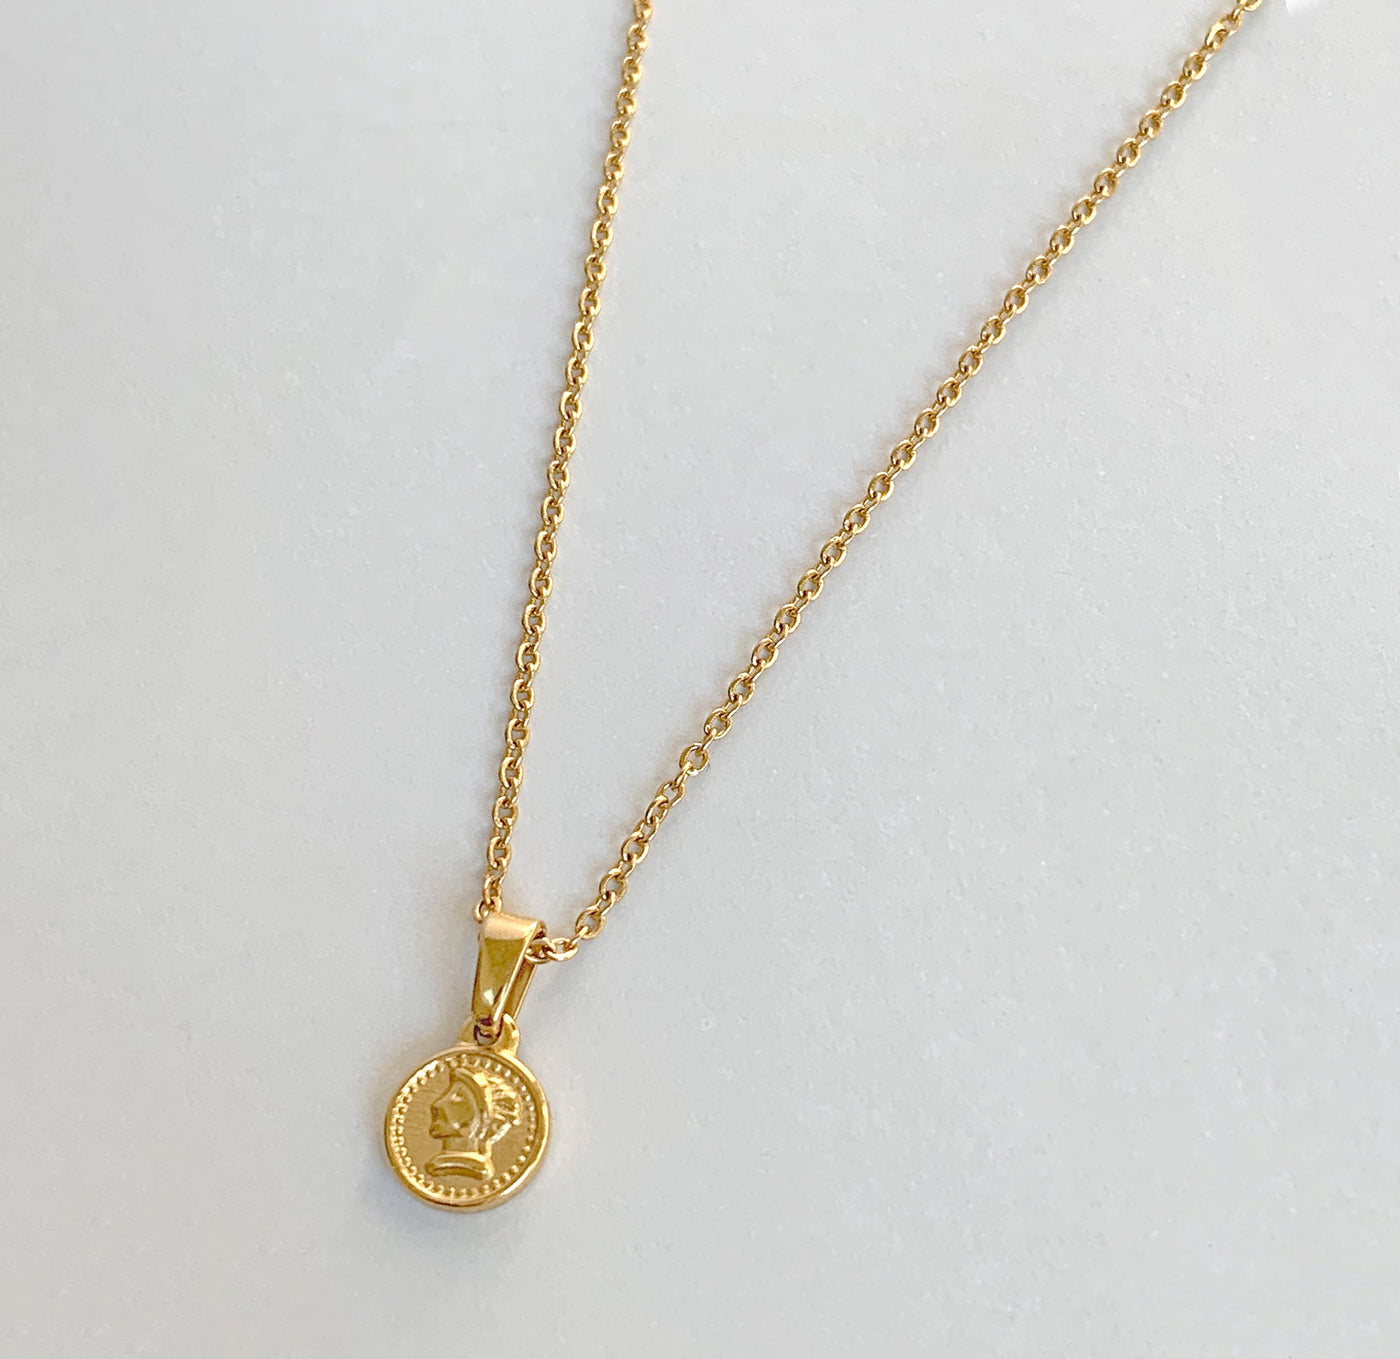 Bella Small Gold Coin Necklace - Waterproof Jewelry